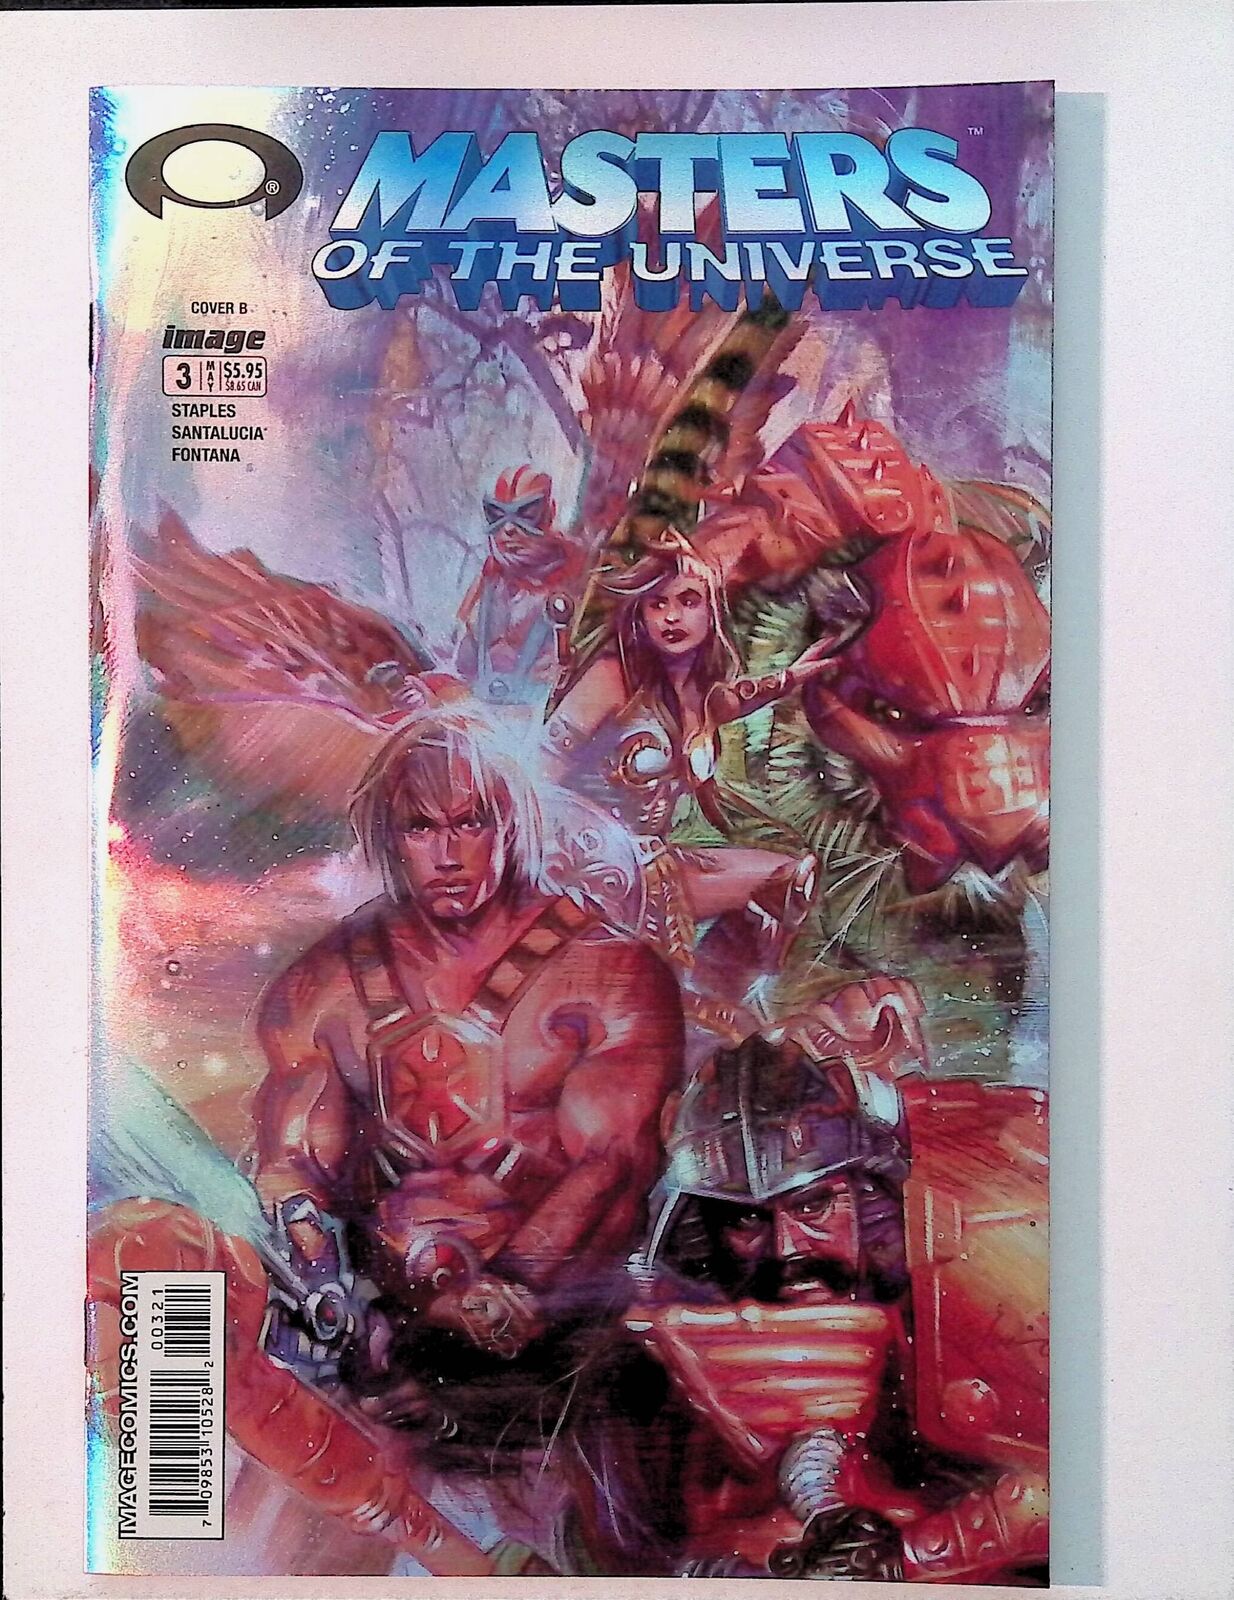 Masters Of The Universe (2003) #3 VF/NM Image Comic Book Holographic Cover B